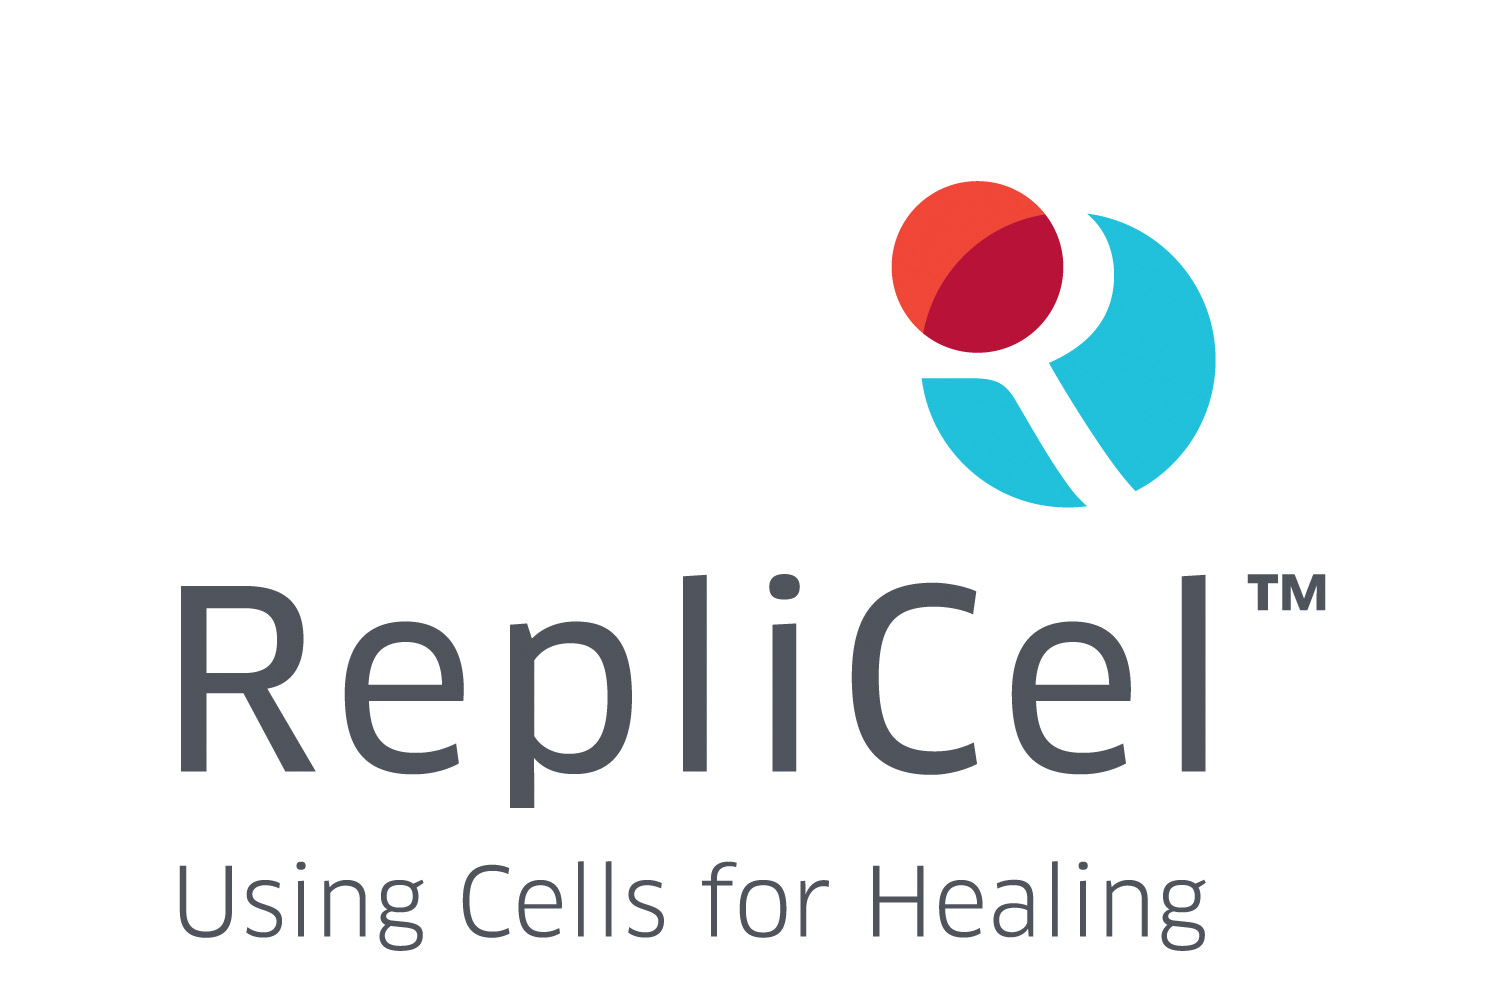 RepliCel Life Sciences, Inc., Tuesday, May 11, 2021, Press release picture